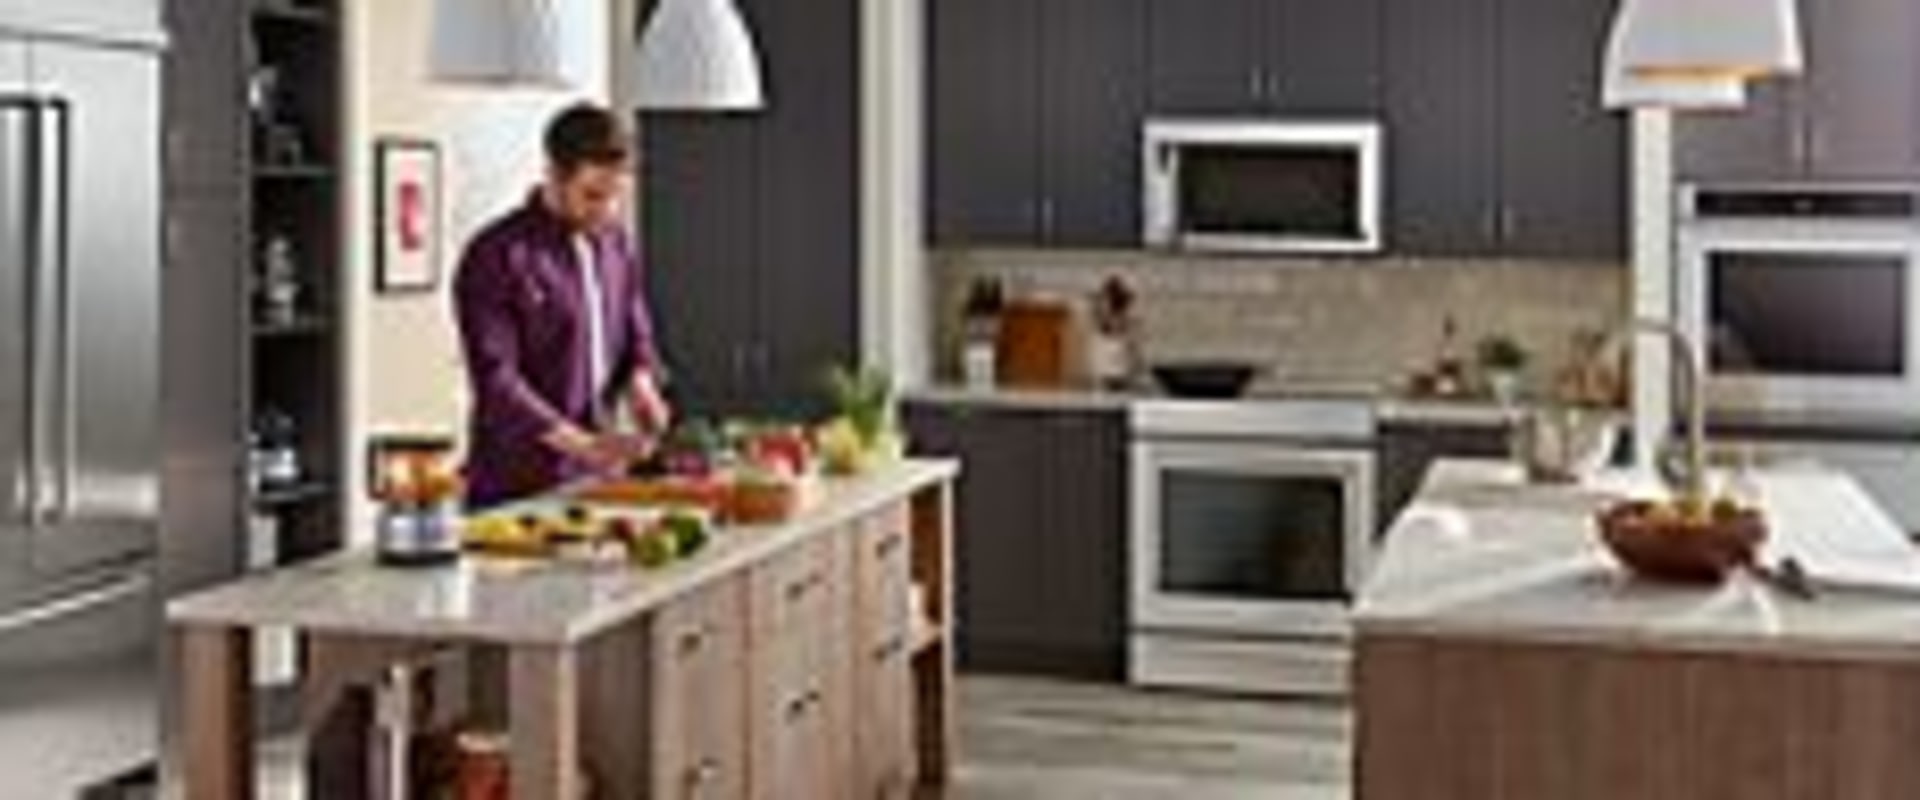 Upgrade Your Home: Appliance Installations and Renovations